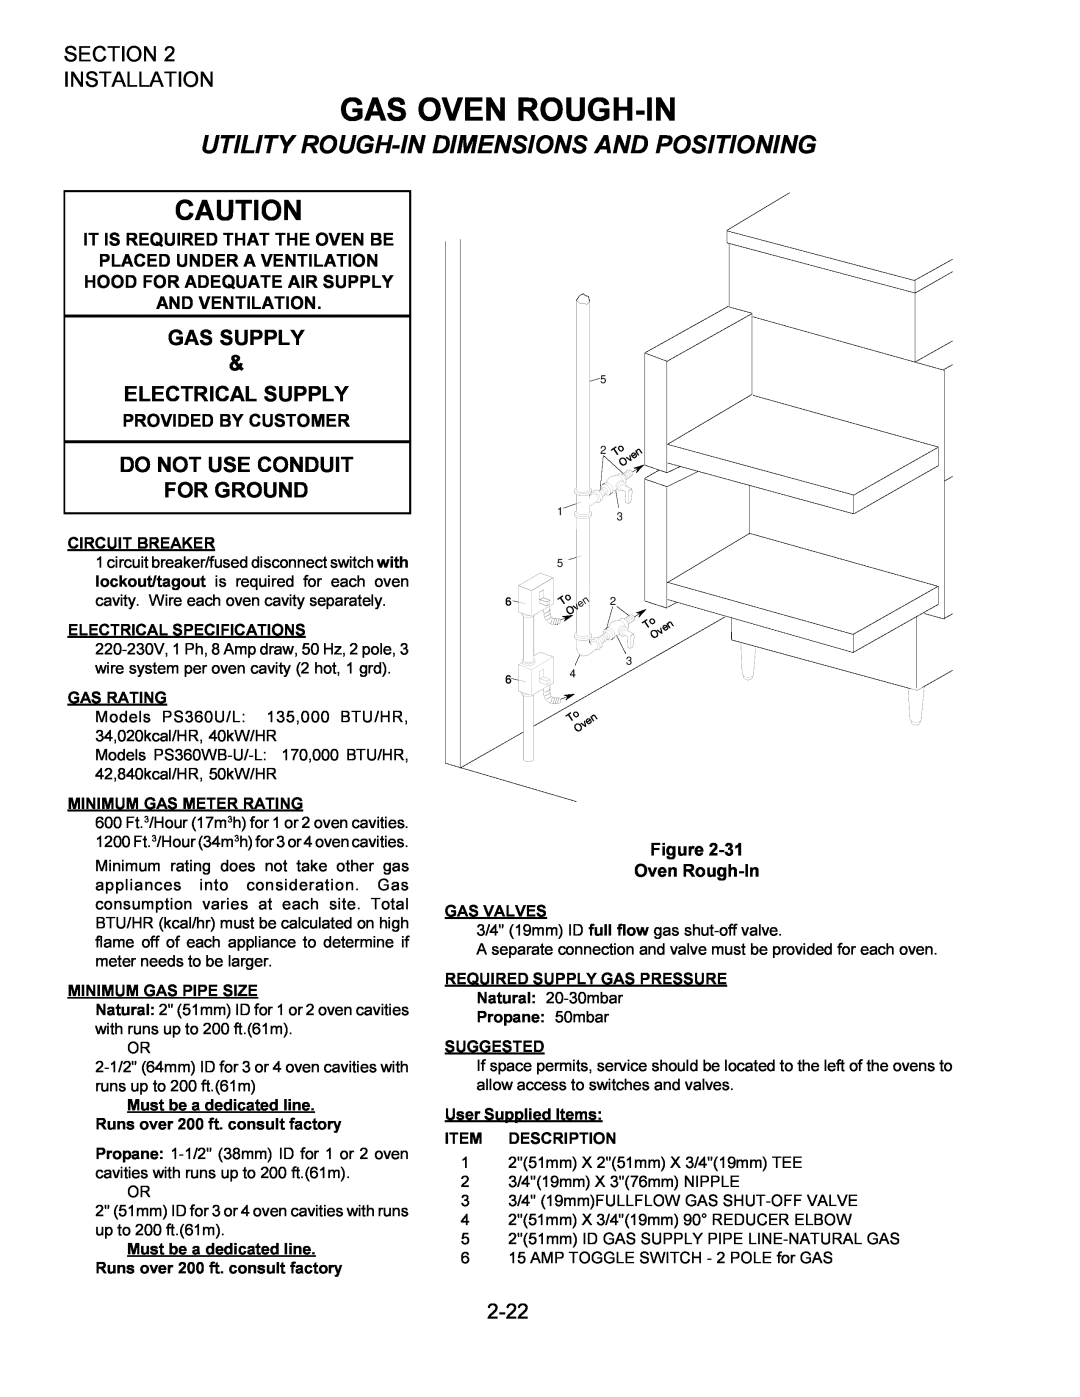 Middleby Marshall owner manual Gas Oven Rough-In, Gas Supply, Electrical Supply, Do Not Use Conduit For Ground, 2-22 